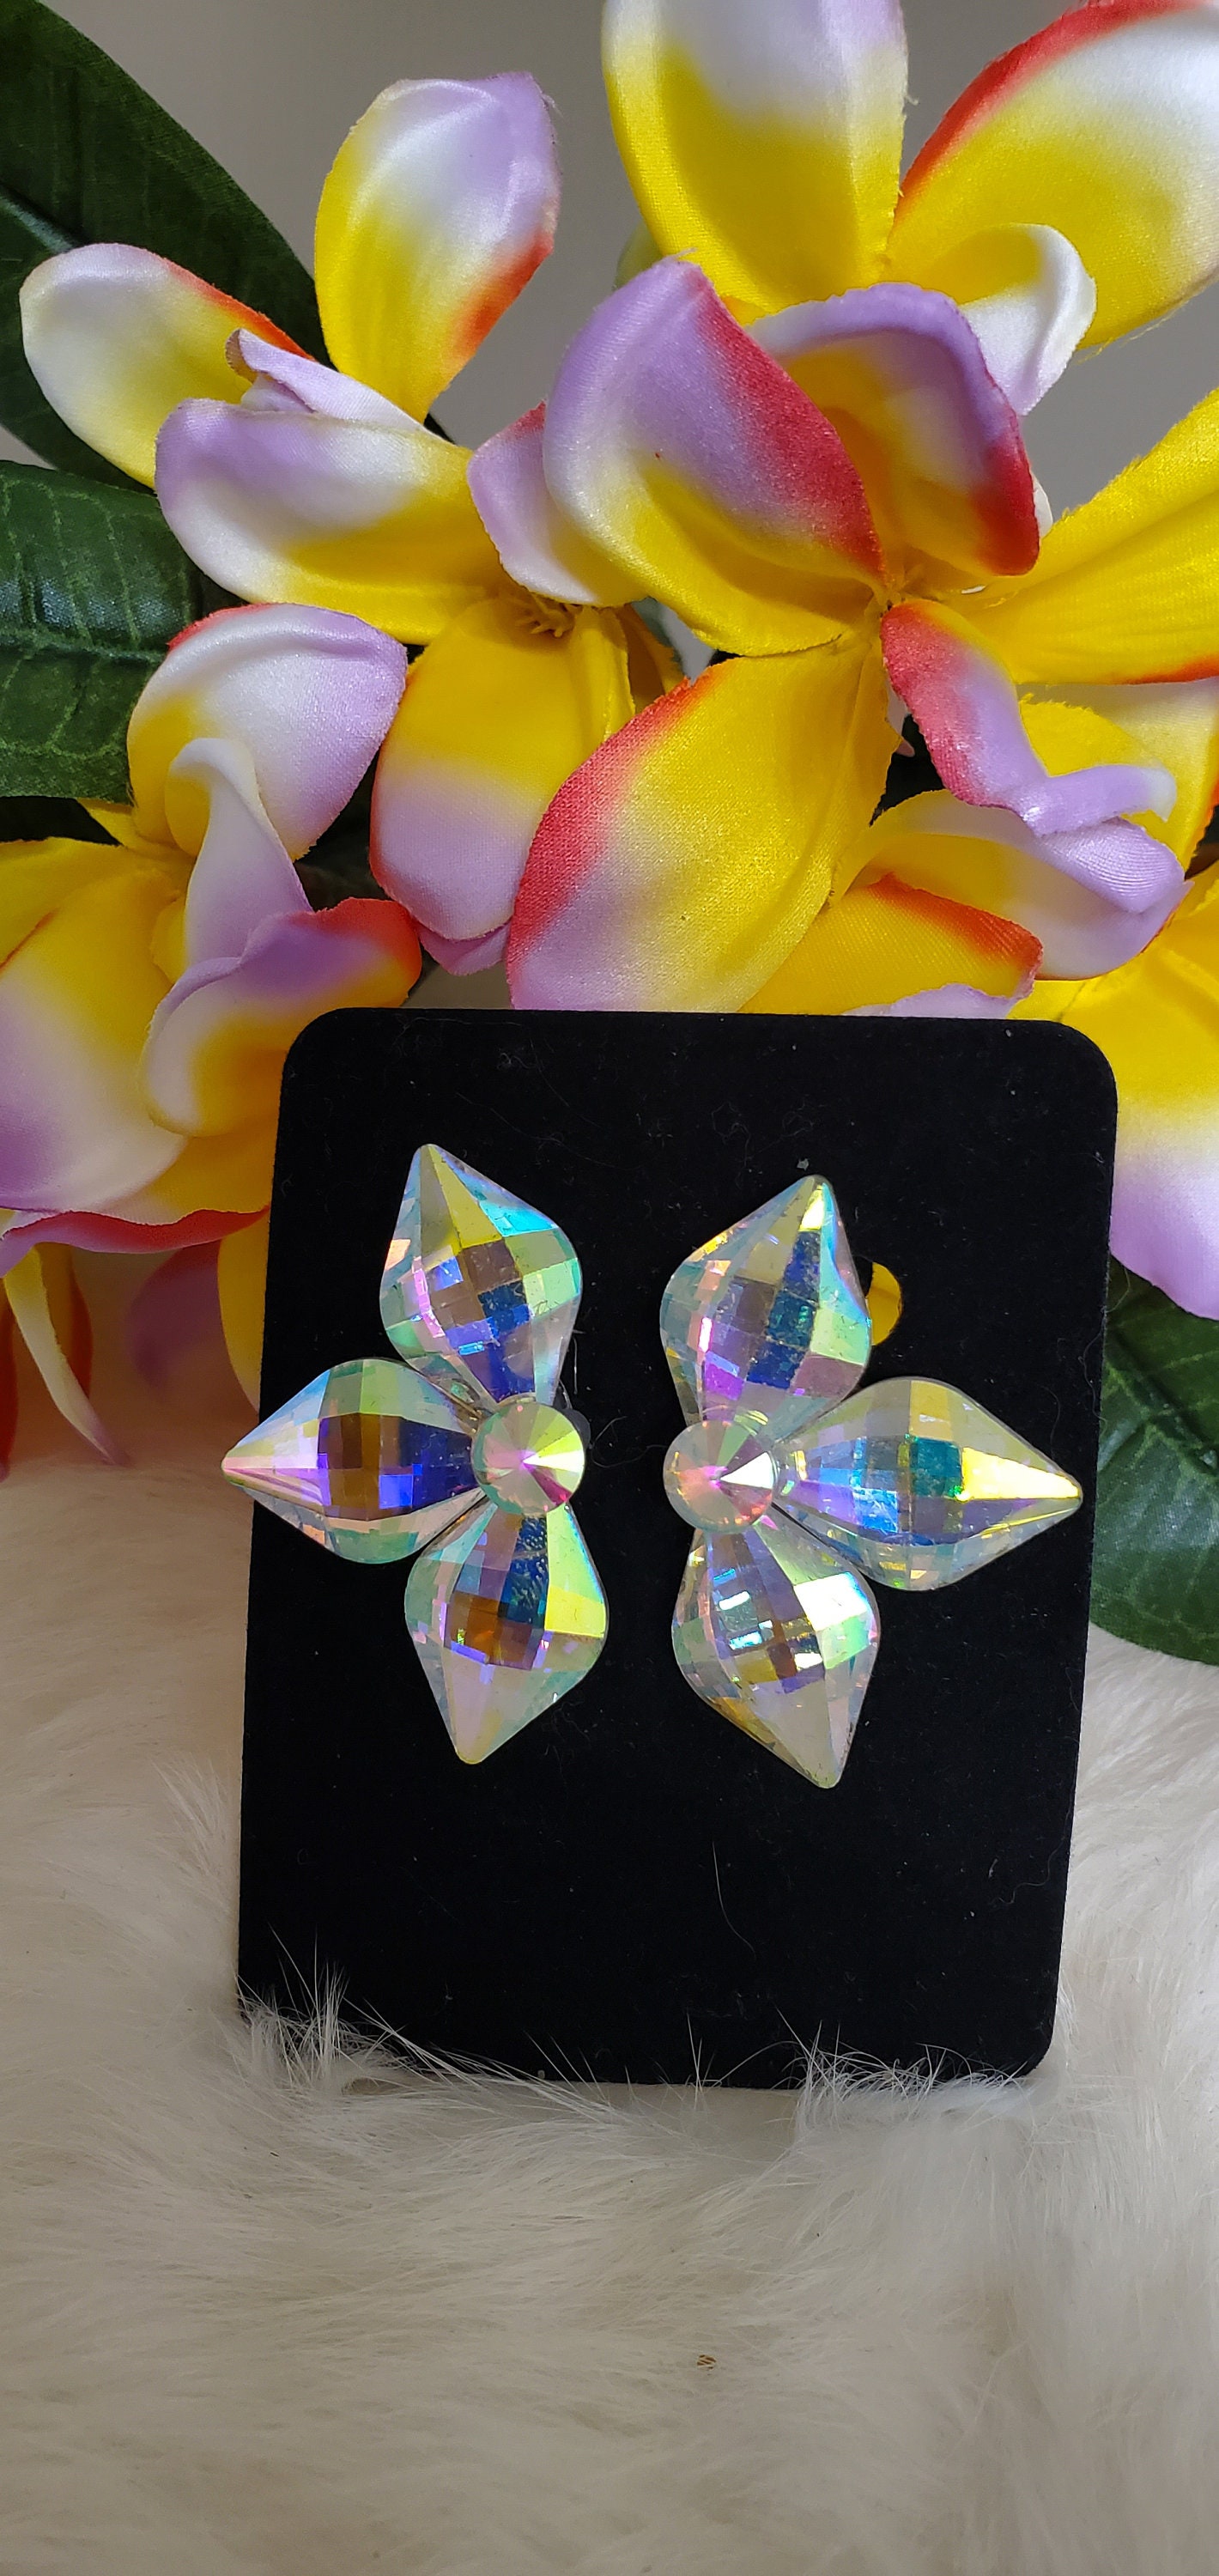 Earrings, Sunflower and Crystal AB Rhinestones – Euro Glam Dance Boutique